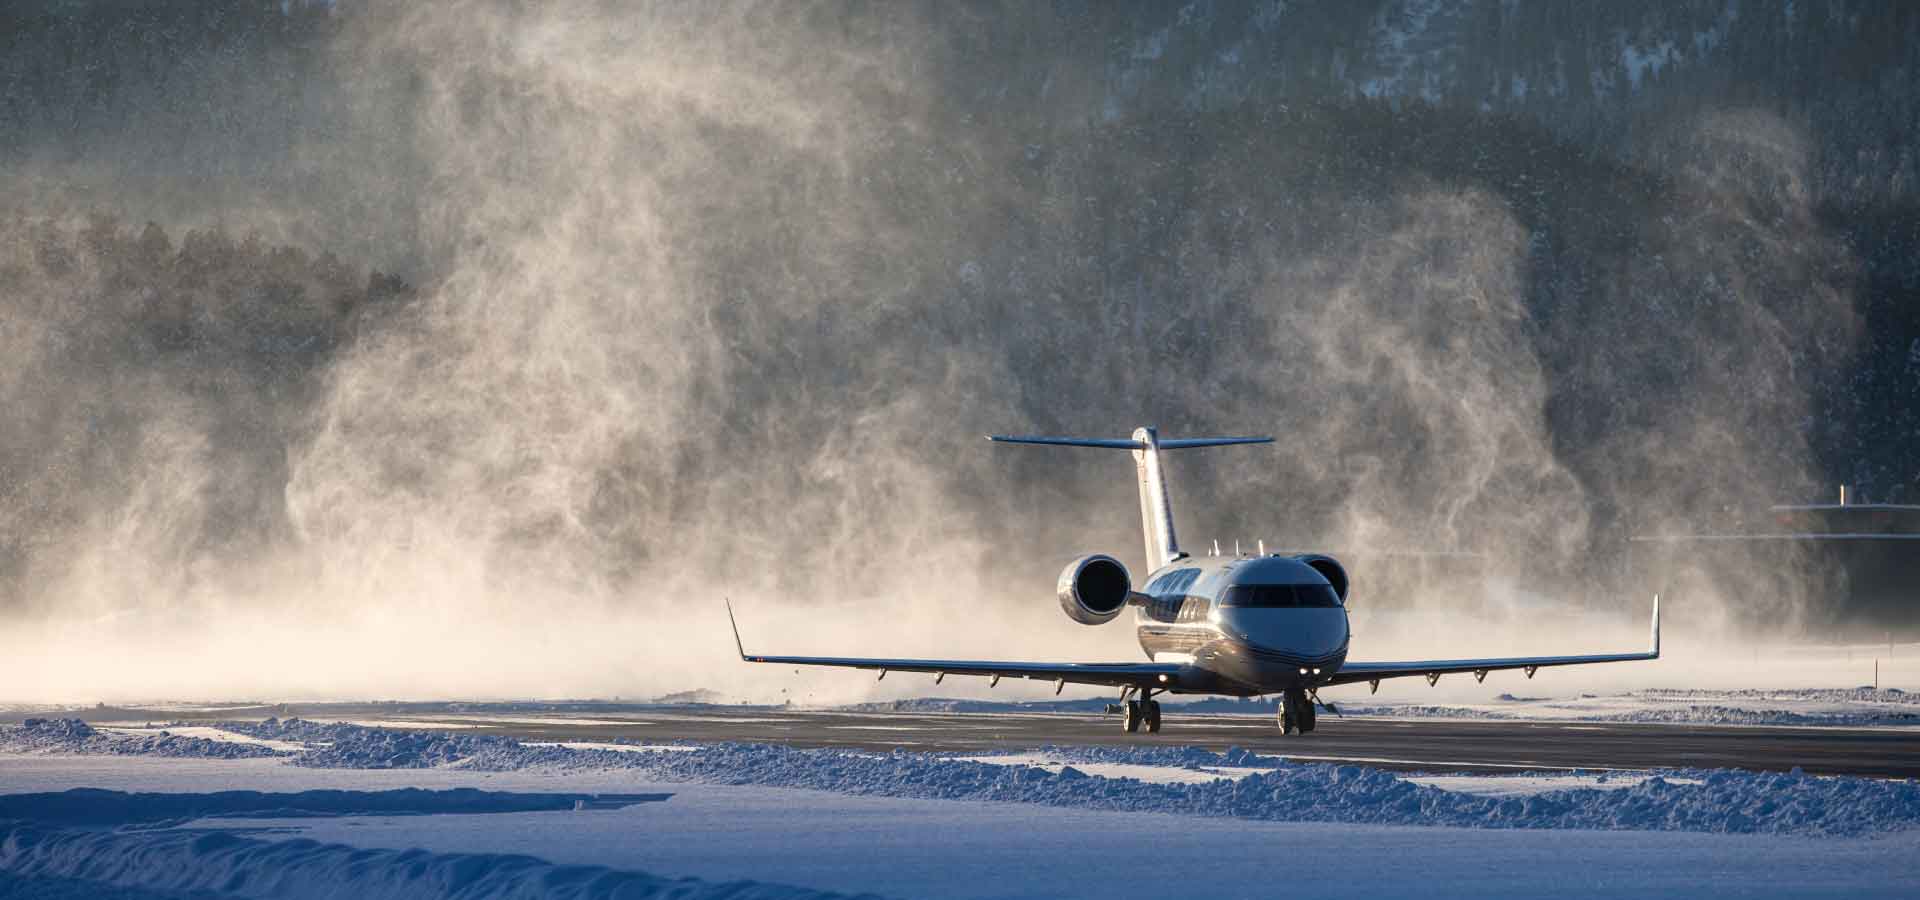 Aircraft departing in snowy conditions